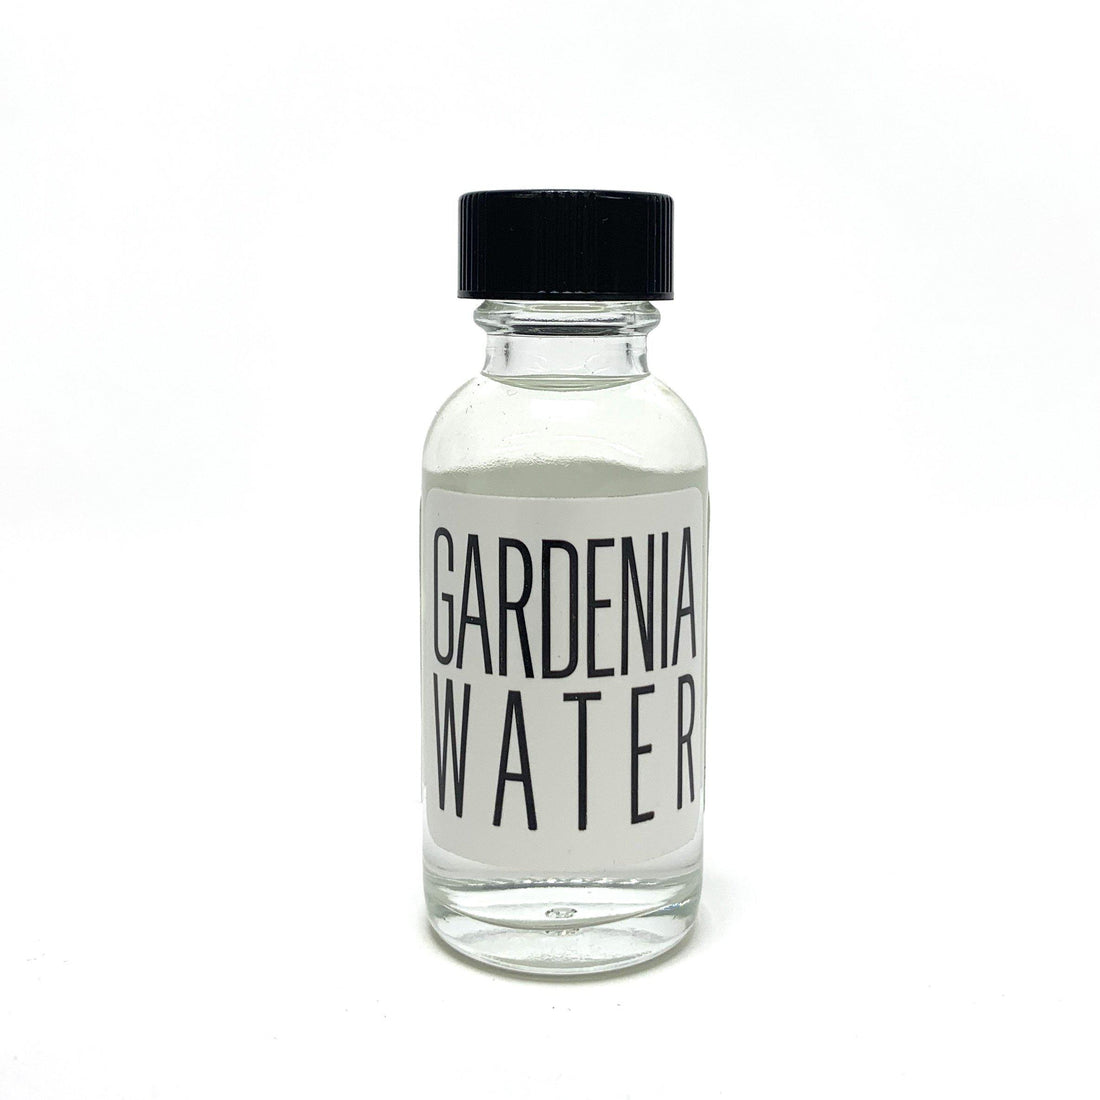 Gardenia Water Holy Waters and Colognes House of Intuition 1 oz $6.00 